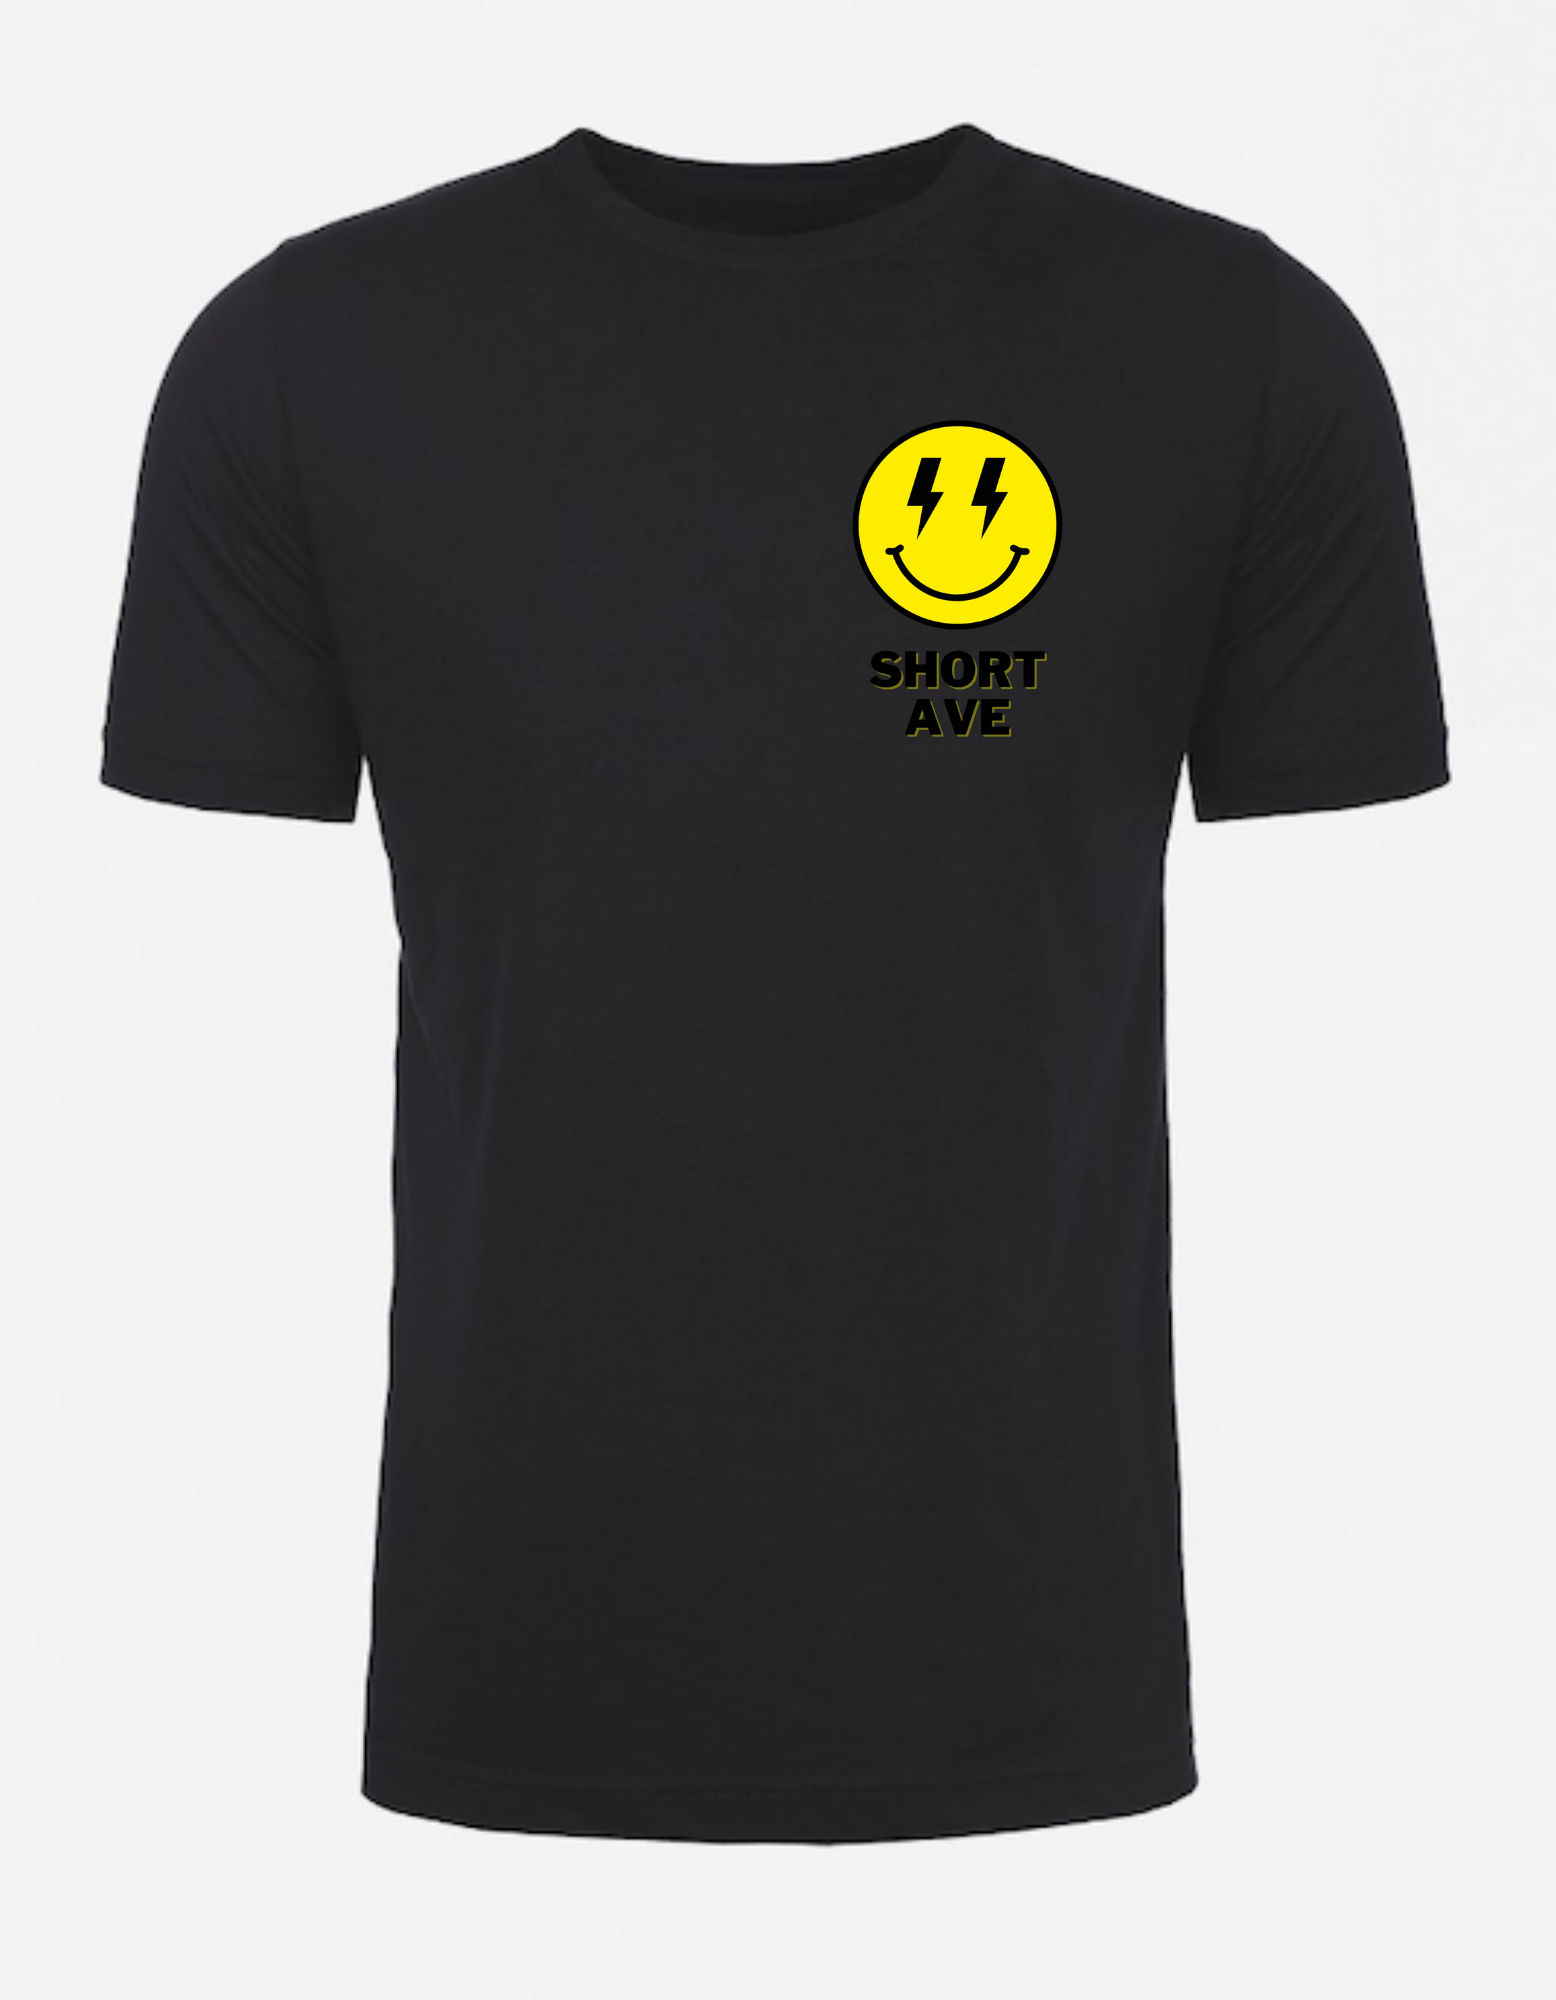 All Smiles Adult T-Shirt